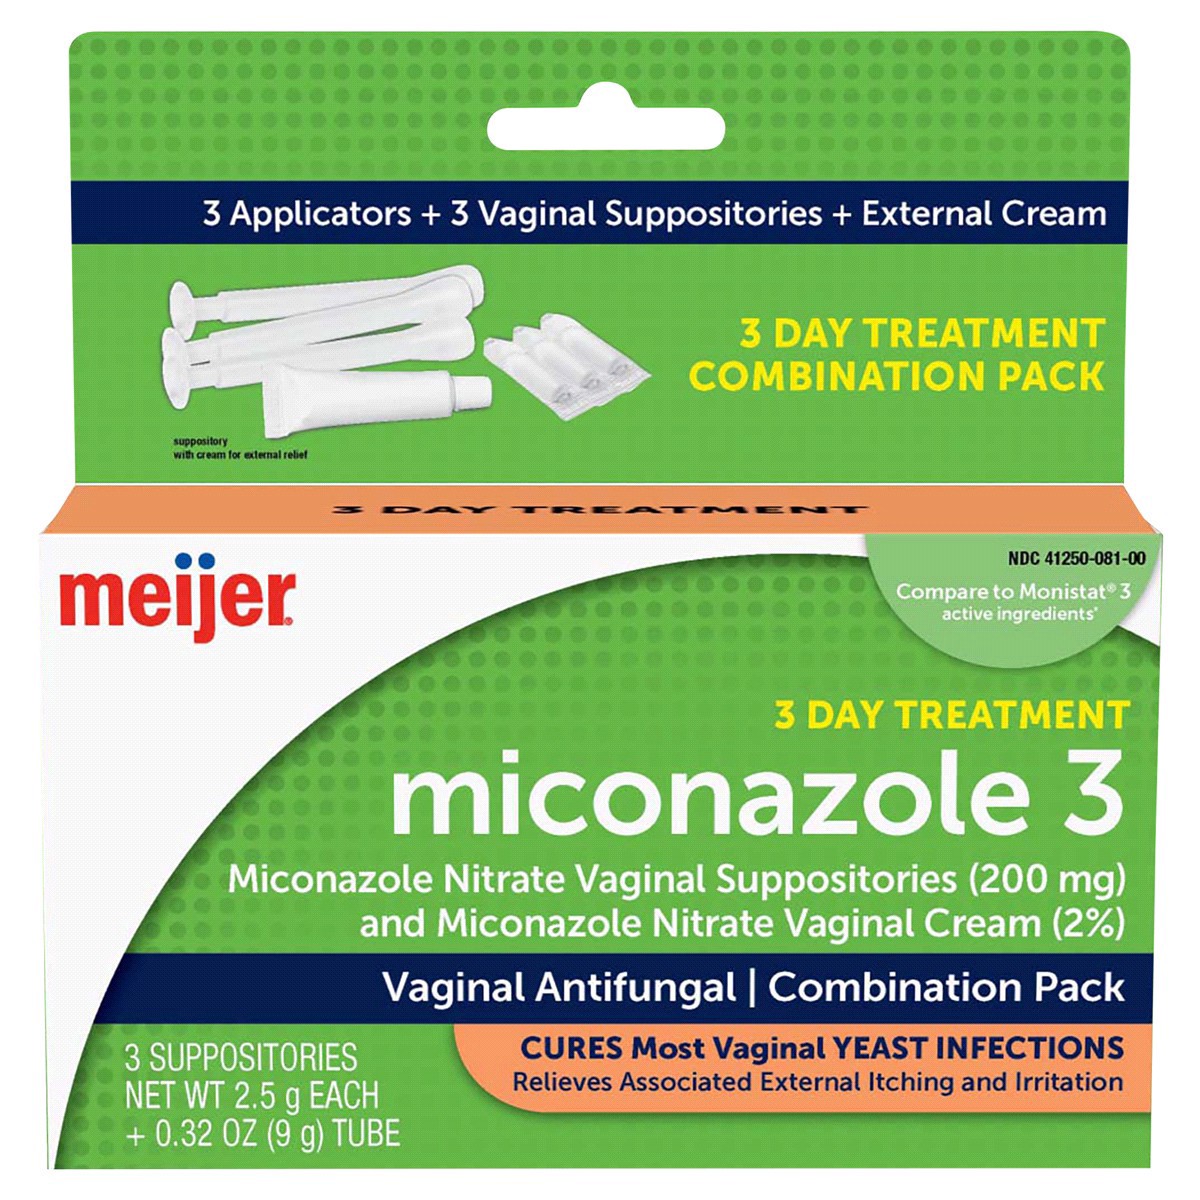 slide 1 of 25, Meijer Miconazole Nitrate Vaginal Suppositories and Miconazole Nitrate Cream (2%), 200 mg, 1 ct